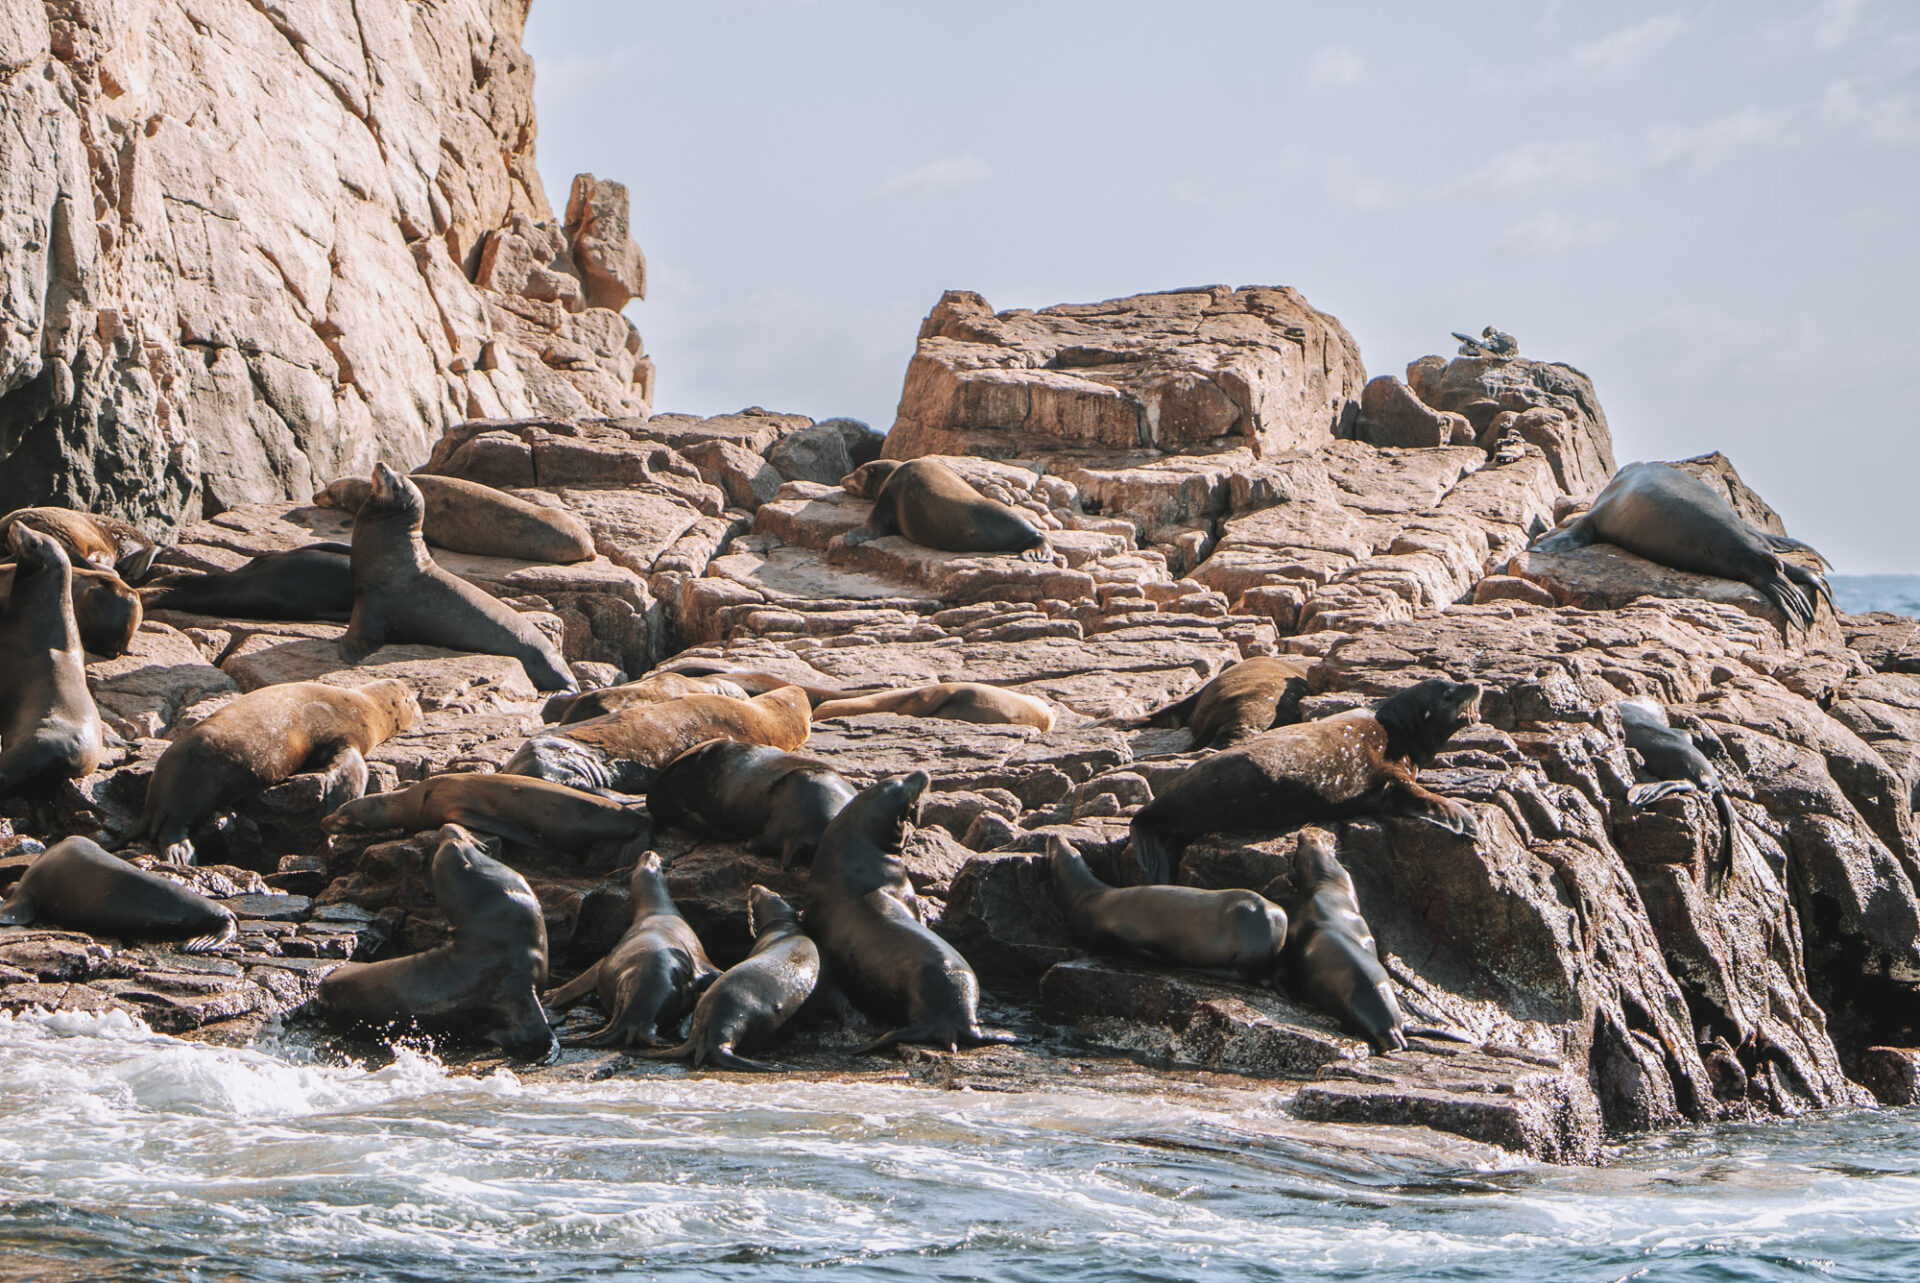 Sea lions basking int he sun near the Arch in Cabo San Lucas